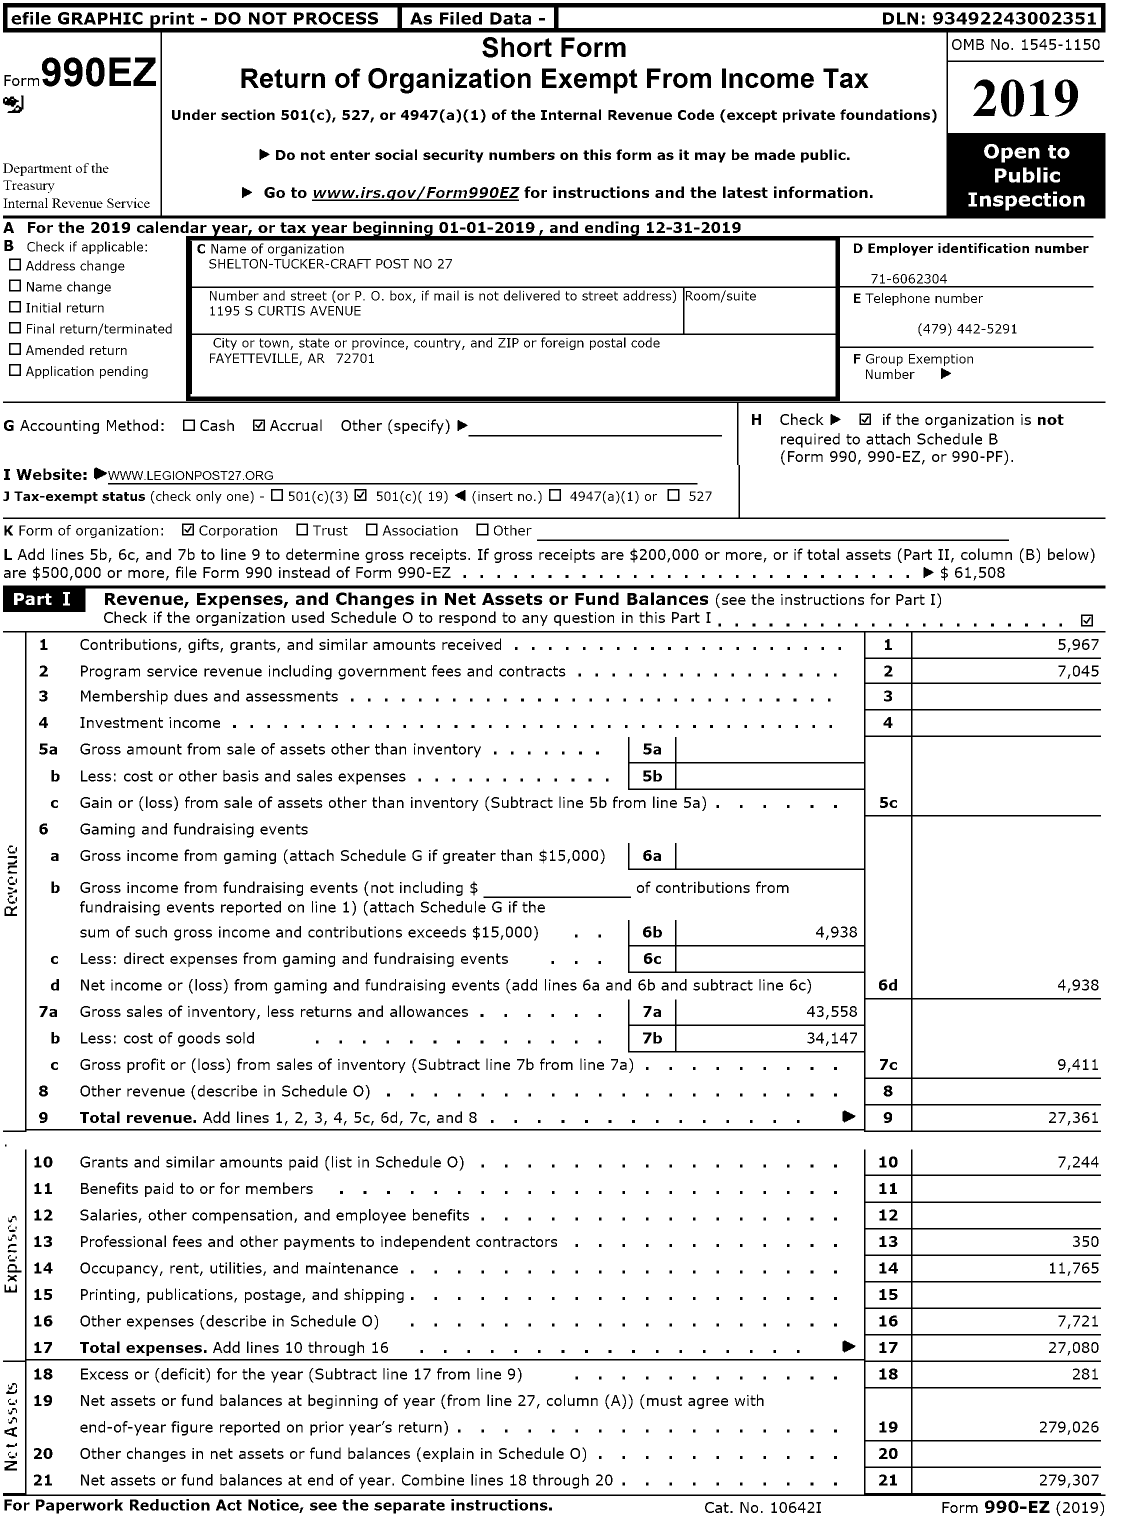 Image of first page of 2019 Form 990EO for Shelton-Tucker-Craft Post No 27